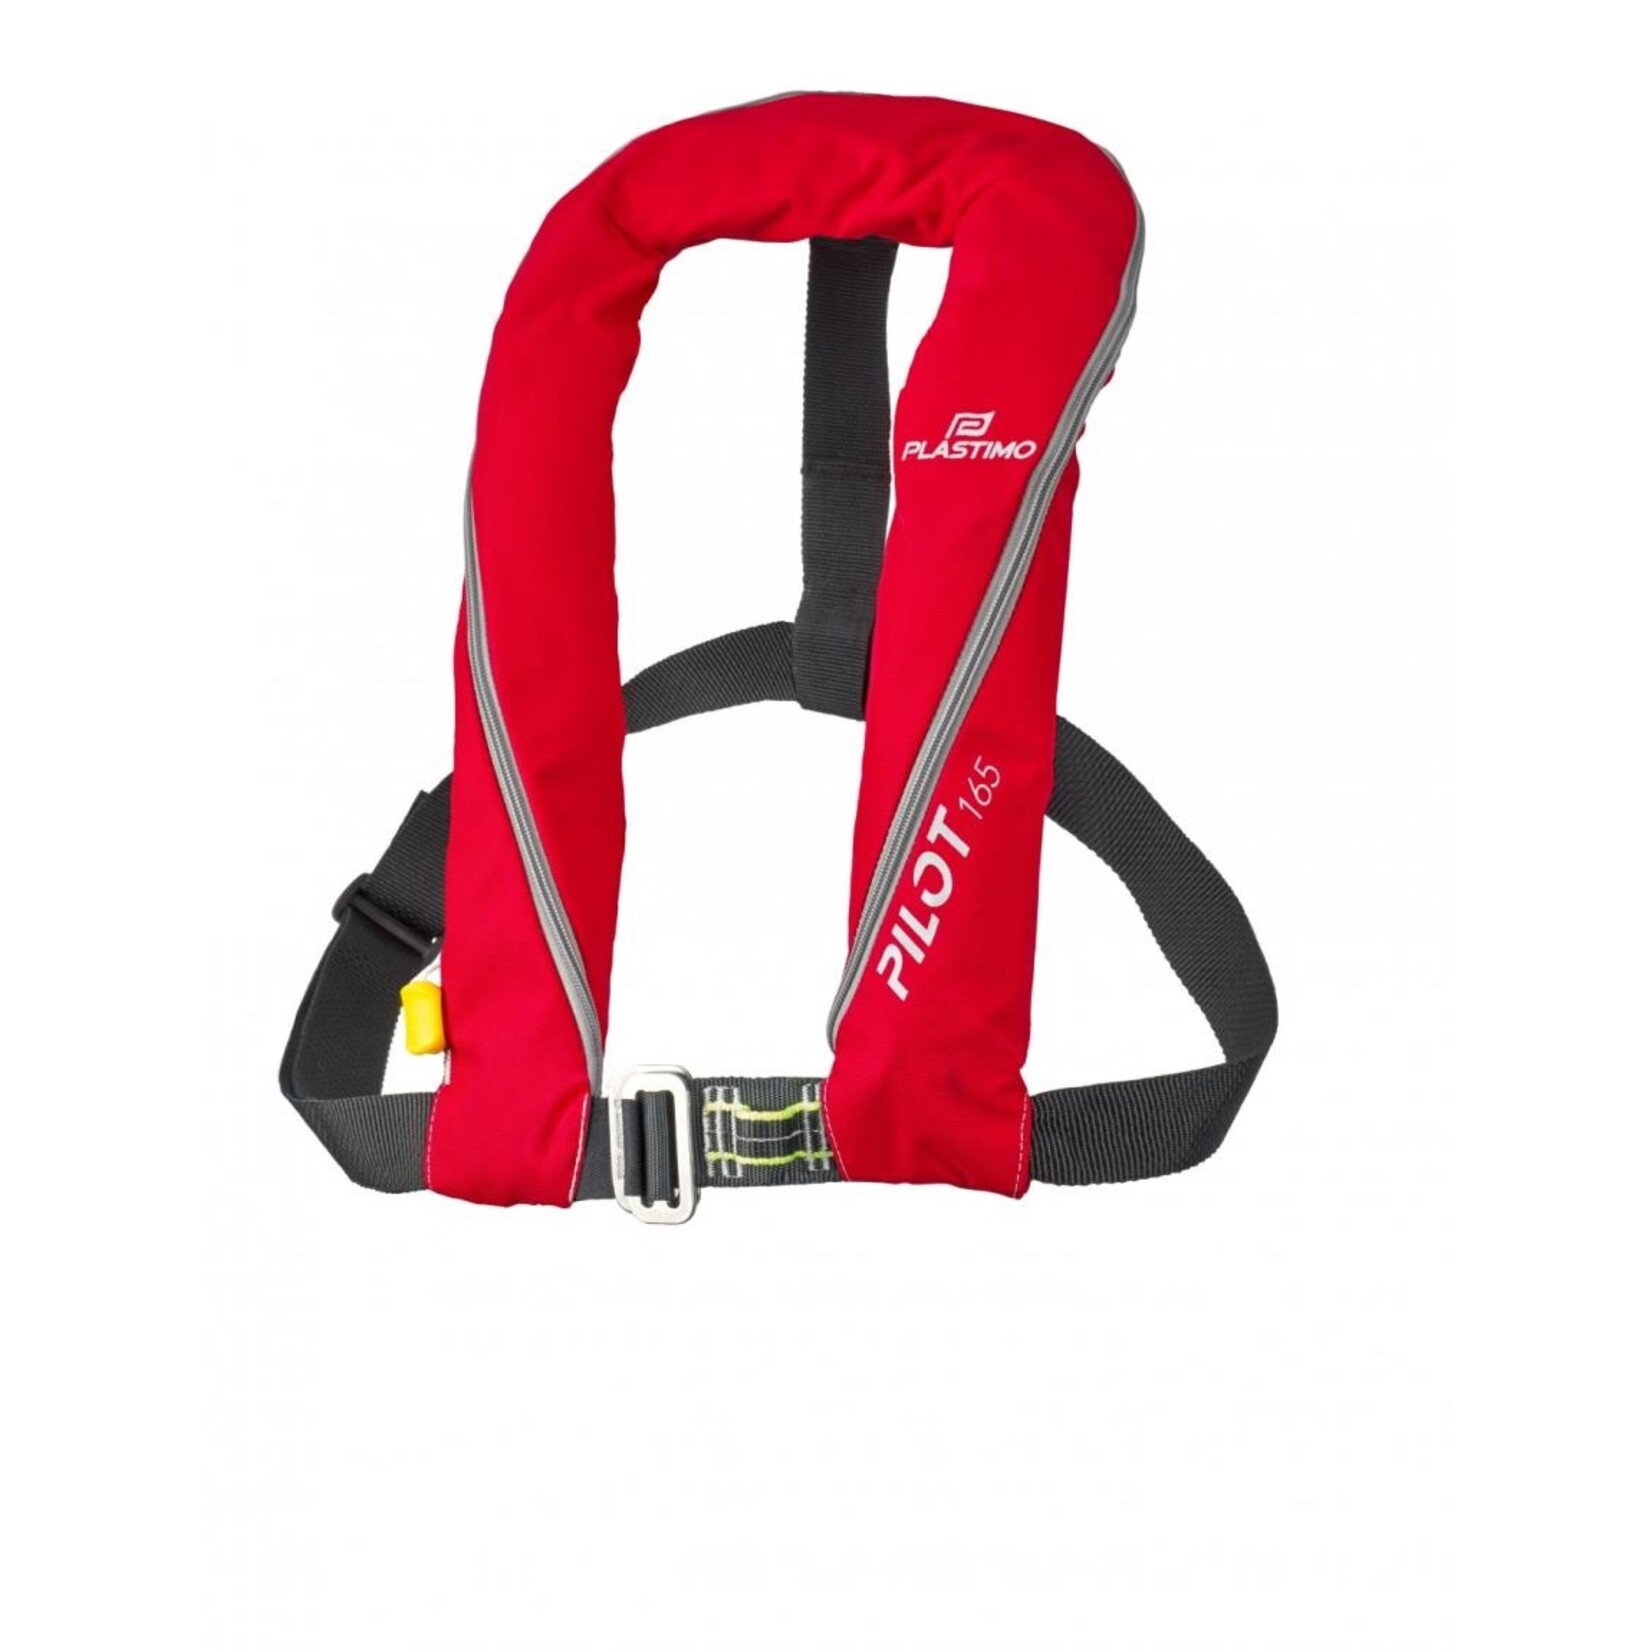 Plastimo Pilot 165 zip manual red with harness